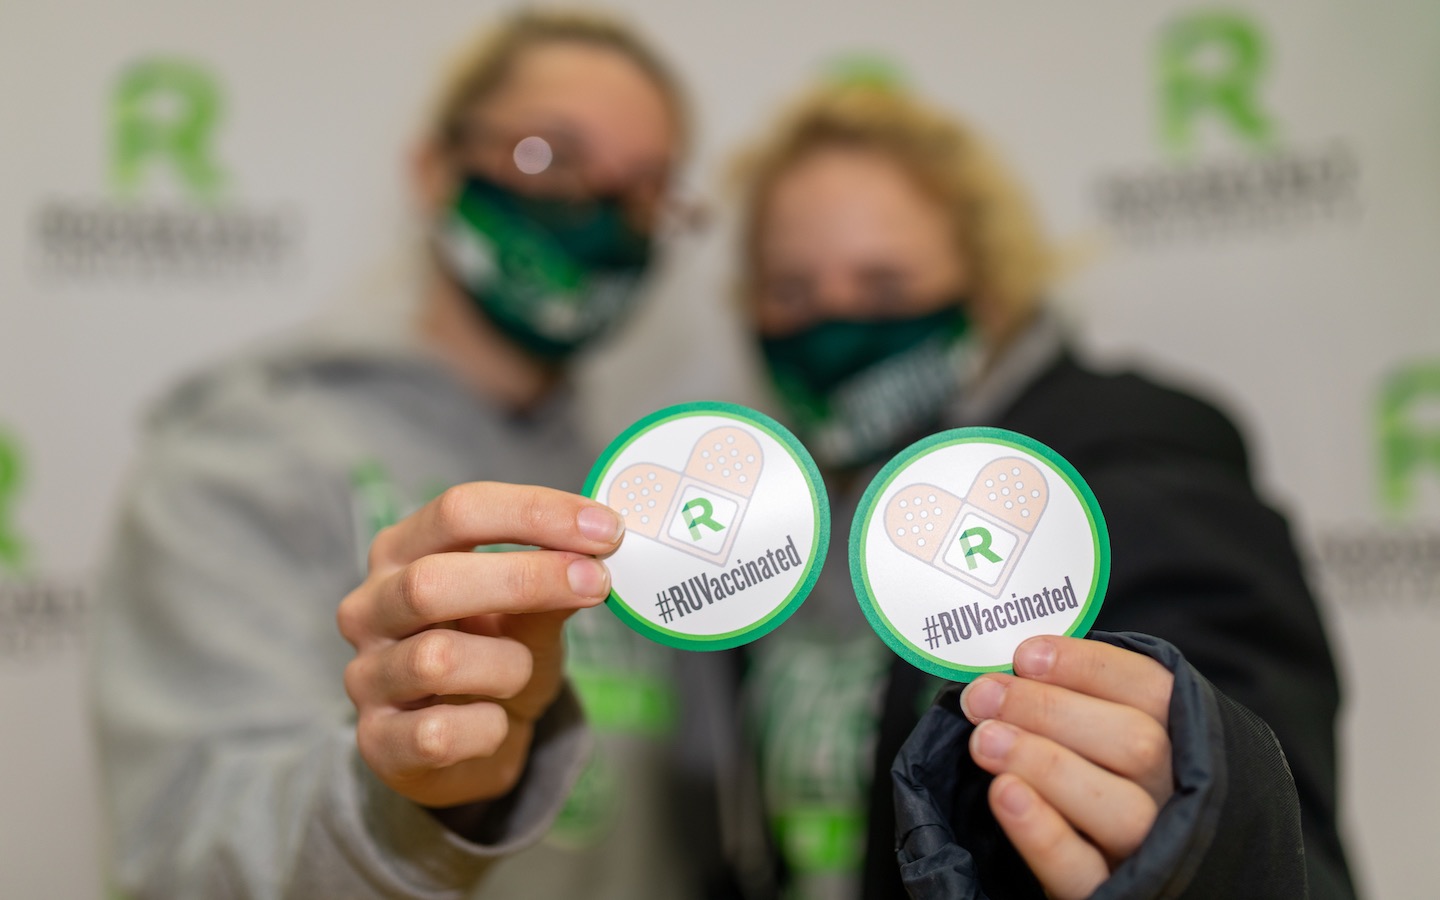 Two women in masks hold RUVaccinated stickers